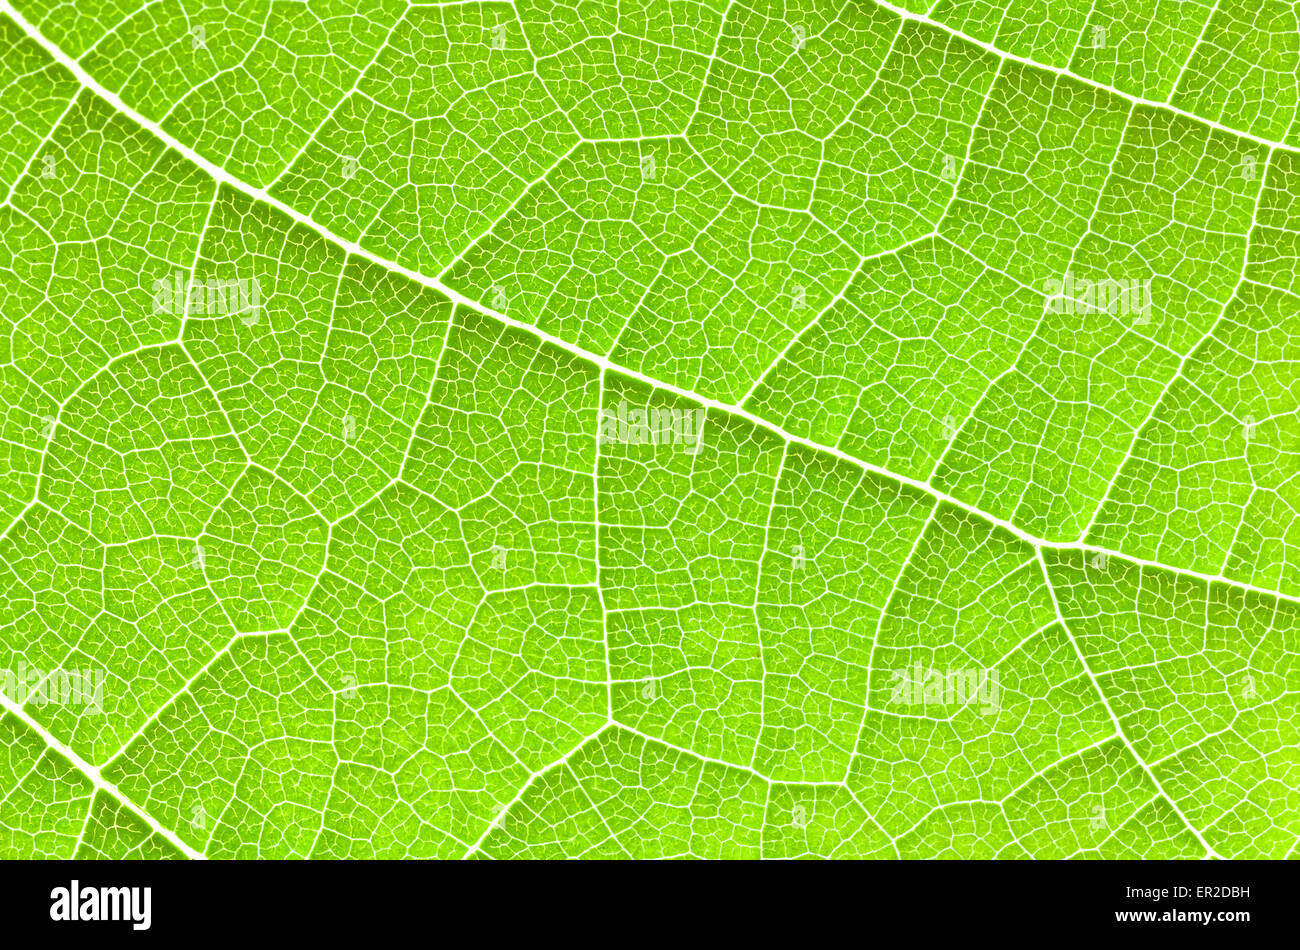 Green leaf close up, abstract texture or background. Stock Photo